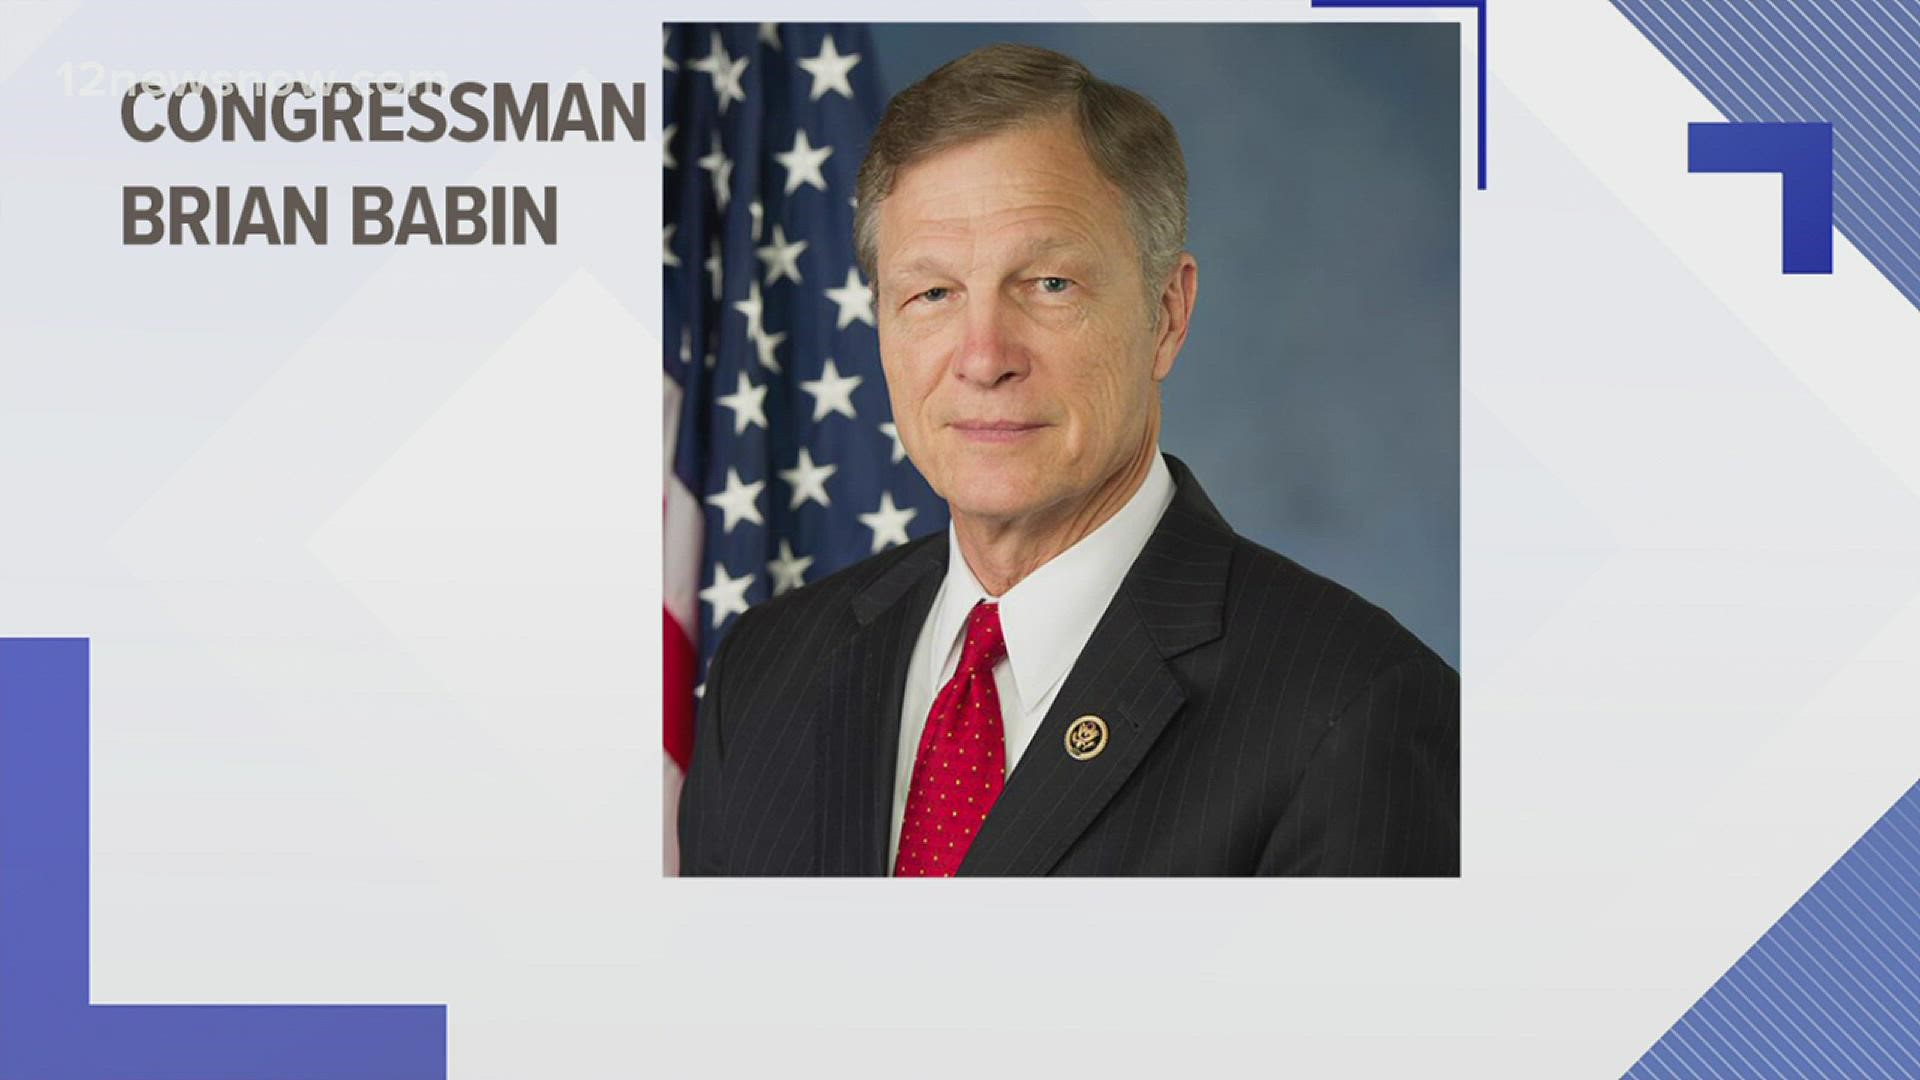 Babin announced on social media that he tested positive for COVID-19 Friday, despite being fully vaccinated.